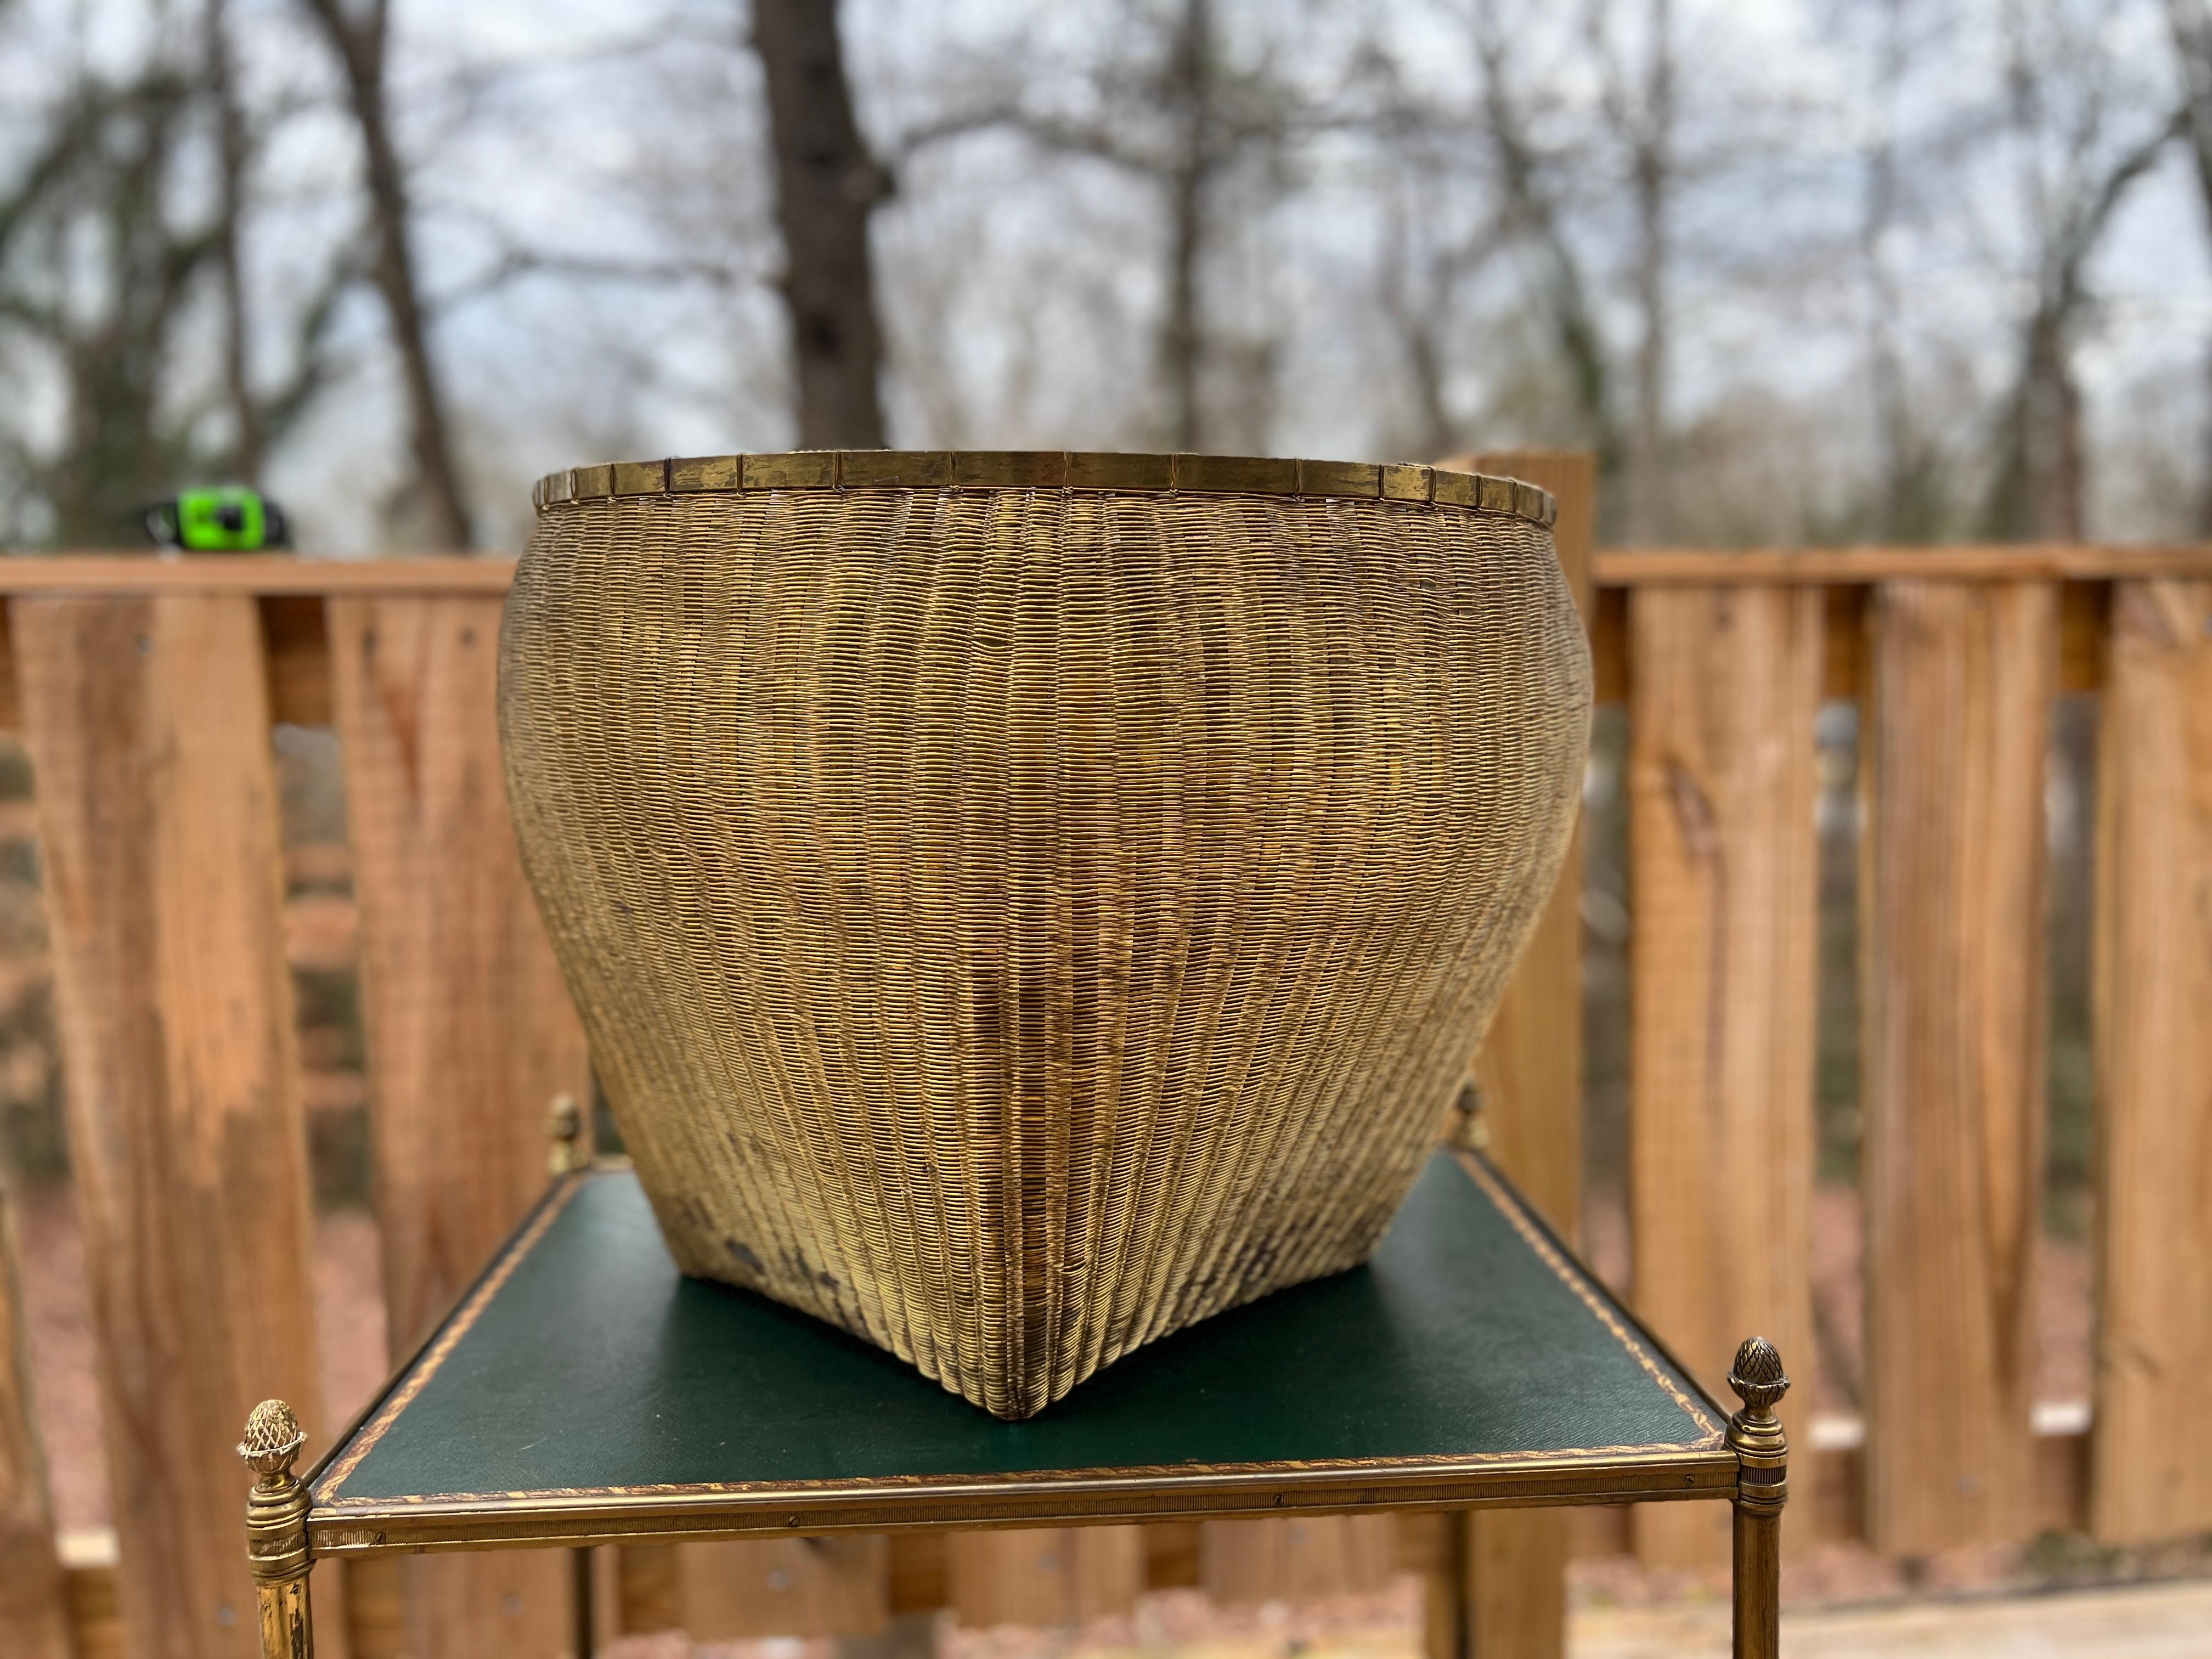 French, C. 1900.

An antique hand woven with bronze & brass wire basket or trash can. Flexible surface, very heavy and high quality.